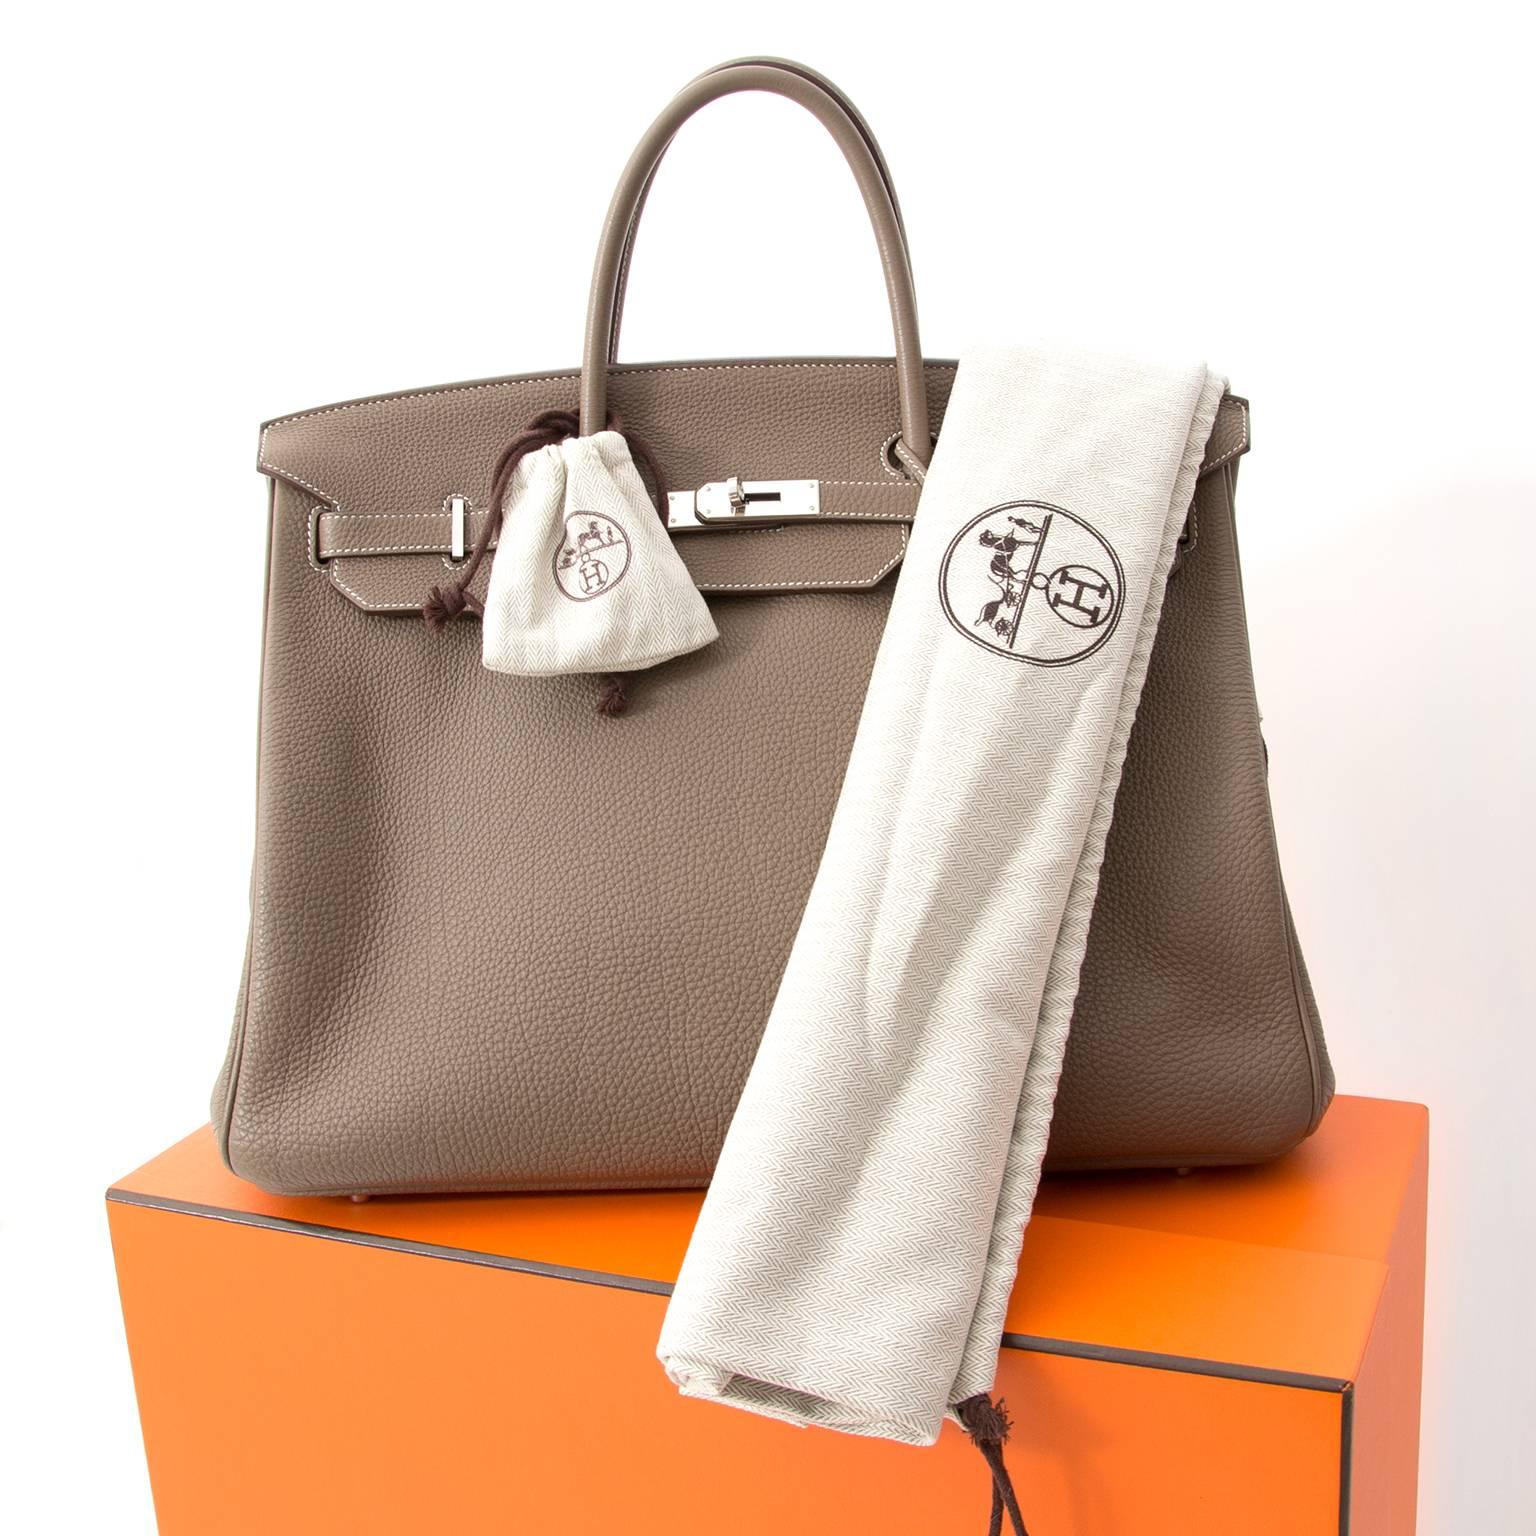 Hermès Birkin bag in timeless warm grey color 'Etoupe' with matching silver-tone Paladium hardware.
Blindstamp 'P' in a suqare, handmade in 2012. 
The Togo leather is soft to the touch and the fine grain gives theh bag a luxurious allure. 